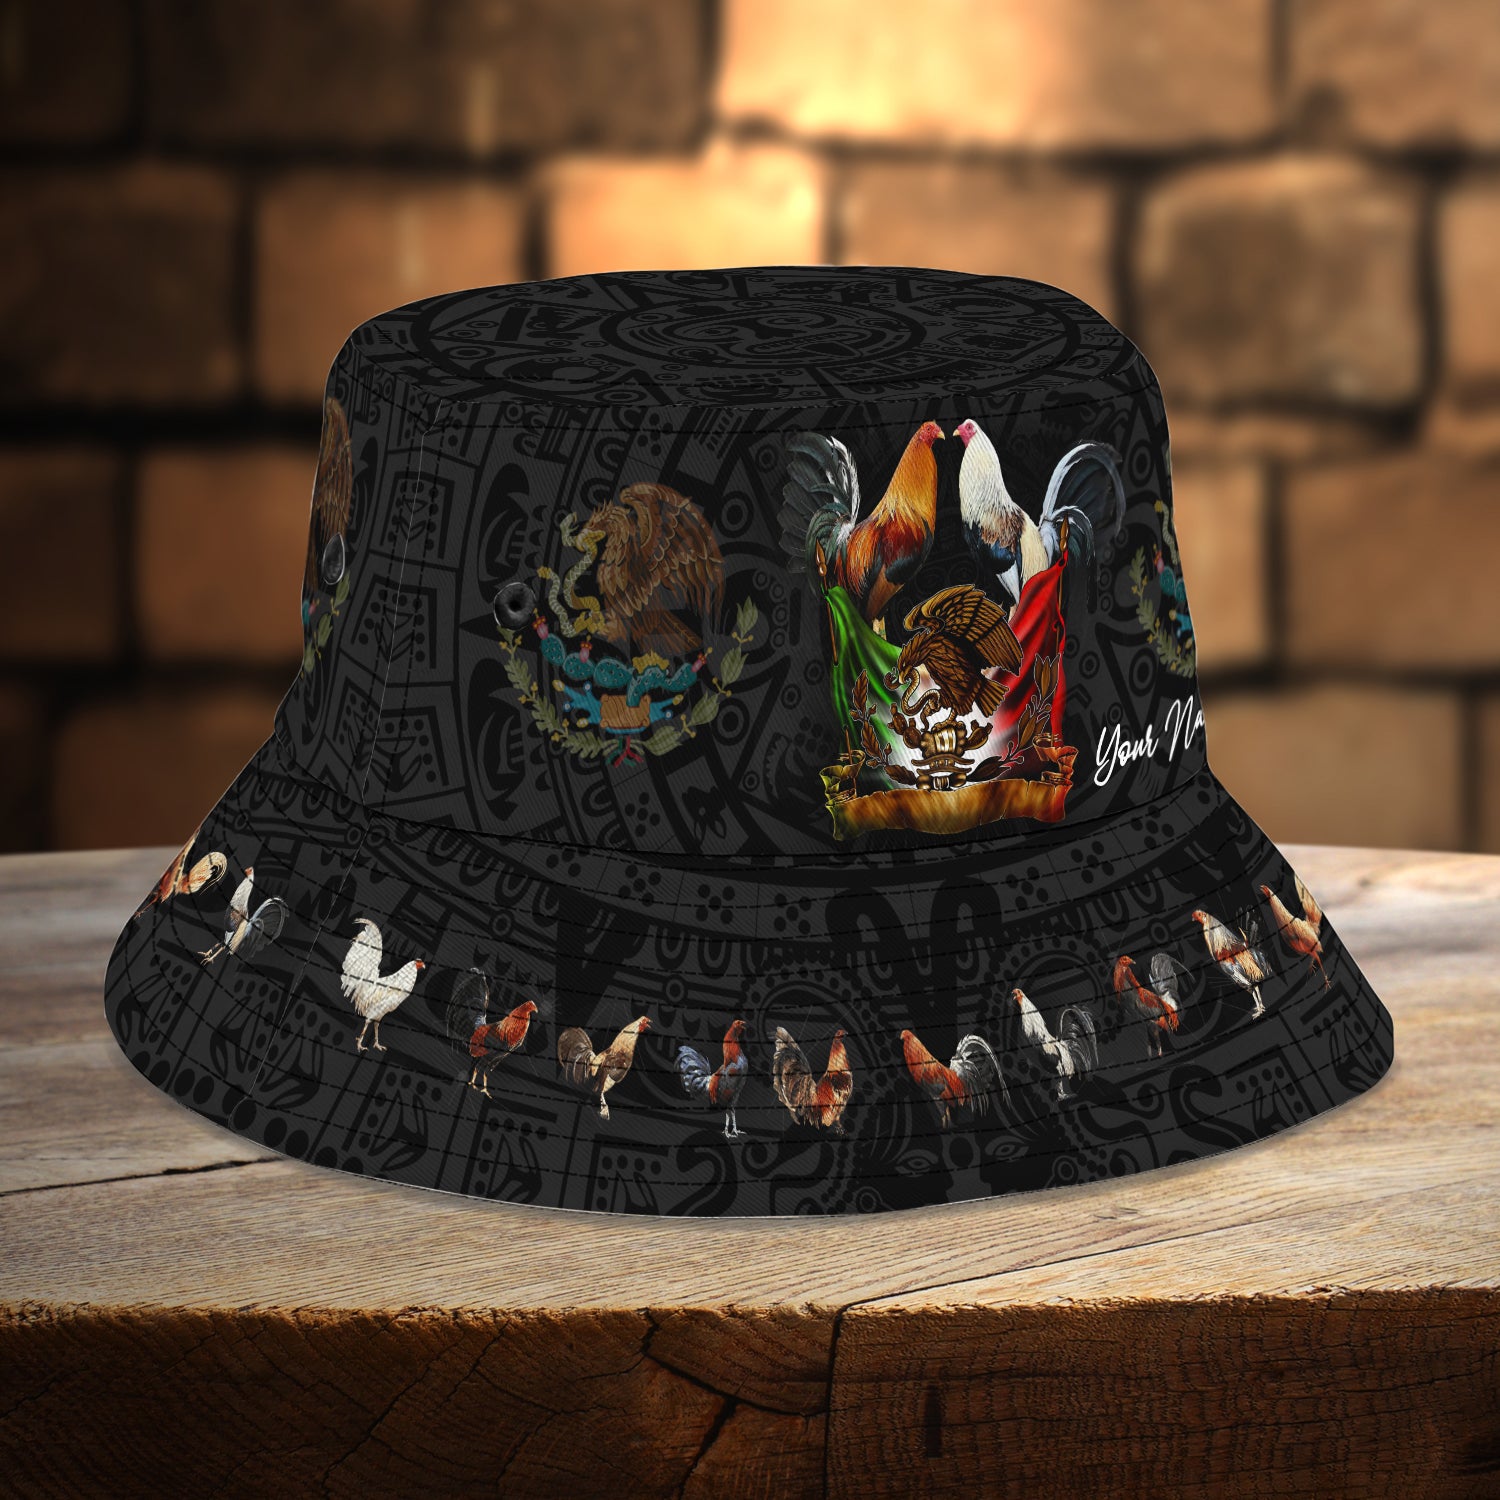 Custom Bucket Hat - Rooster Mexico - Vtm99 C25